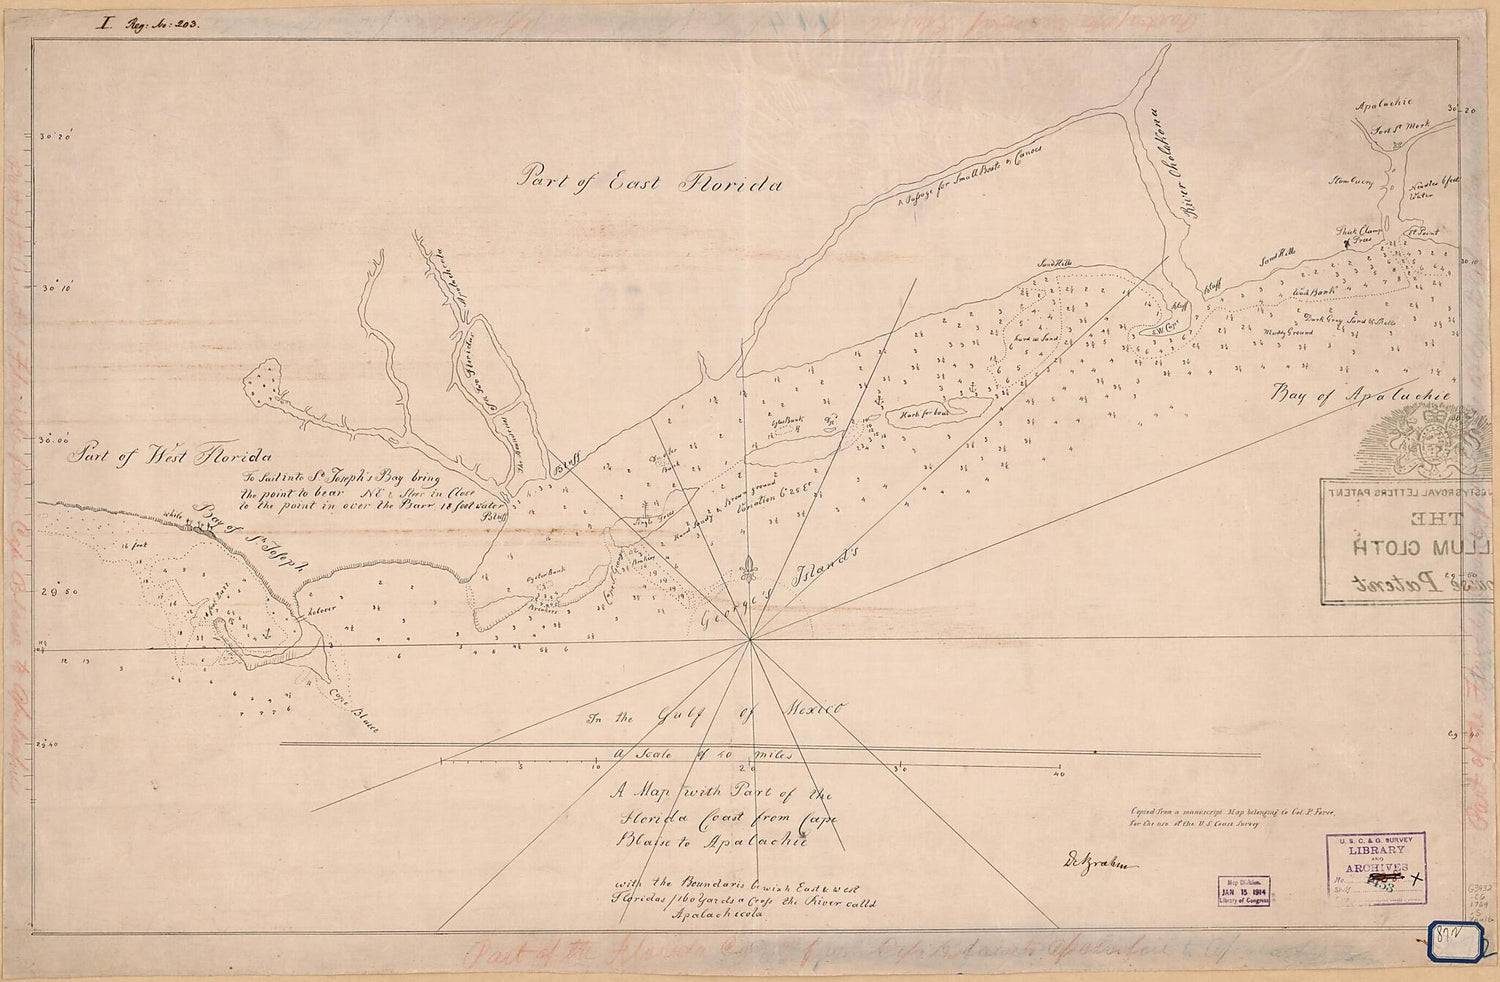 This old map of A Map With Part of the Florida Coast from Cape Blaise to Apalachie : With the Boundaries Bewixh East &amp; West Floridas : 160 Yards Across the River Calld Apalachicola. (Florida Coast from Cape Blaise to Apalachie) from 1769 was created by J